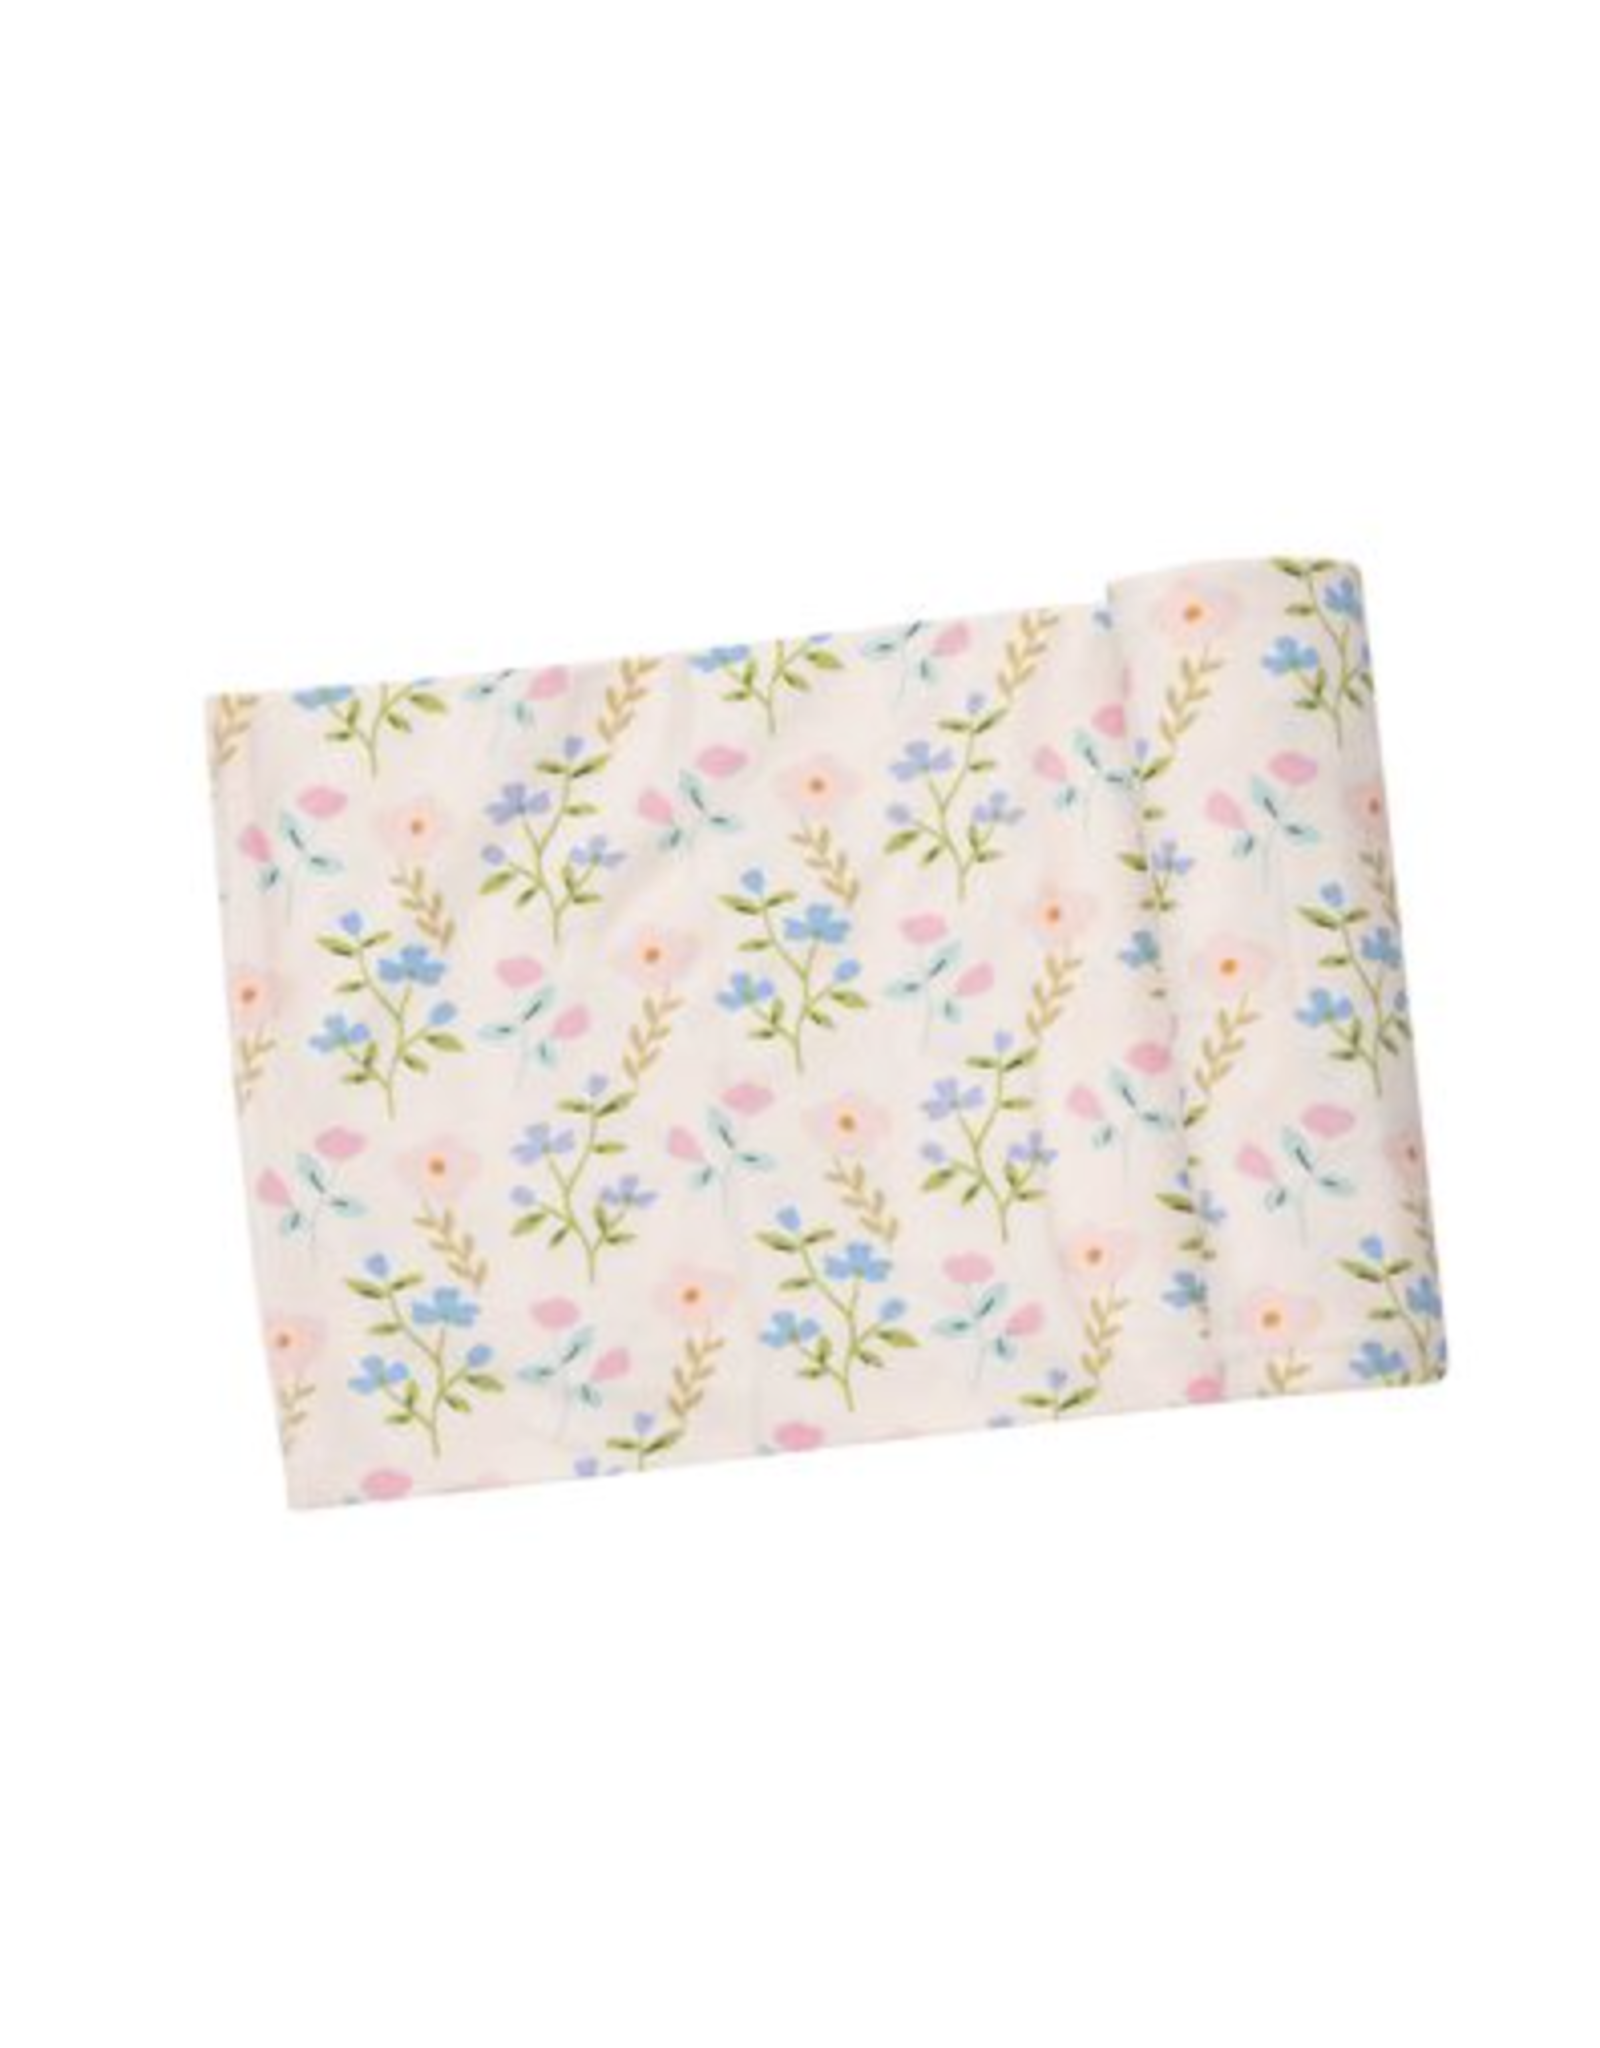 Angel Dear ADS24 Swaddle Blanket Simple Pretty Floral